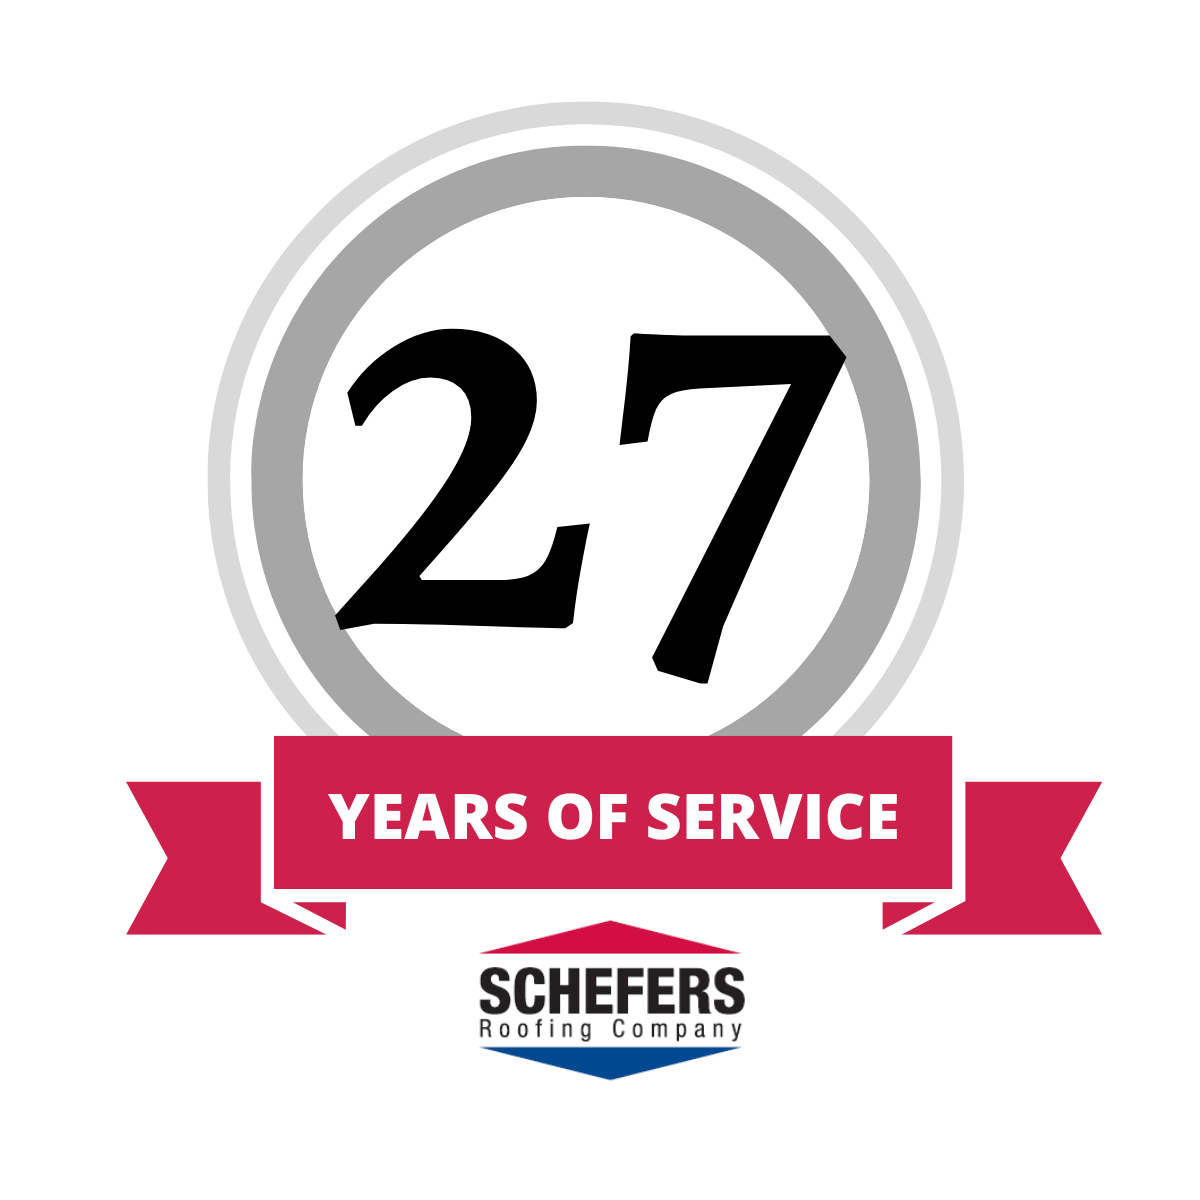 Schefers Roofing Celebrates 27th Anniversary